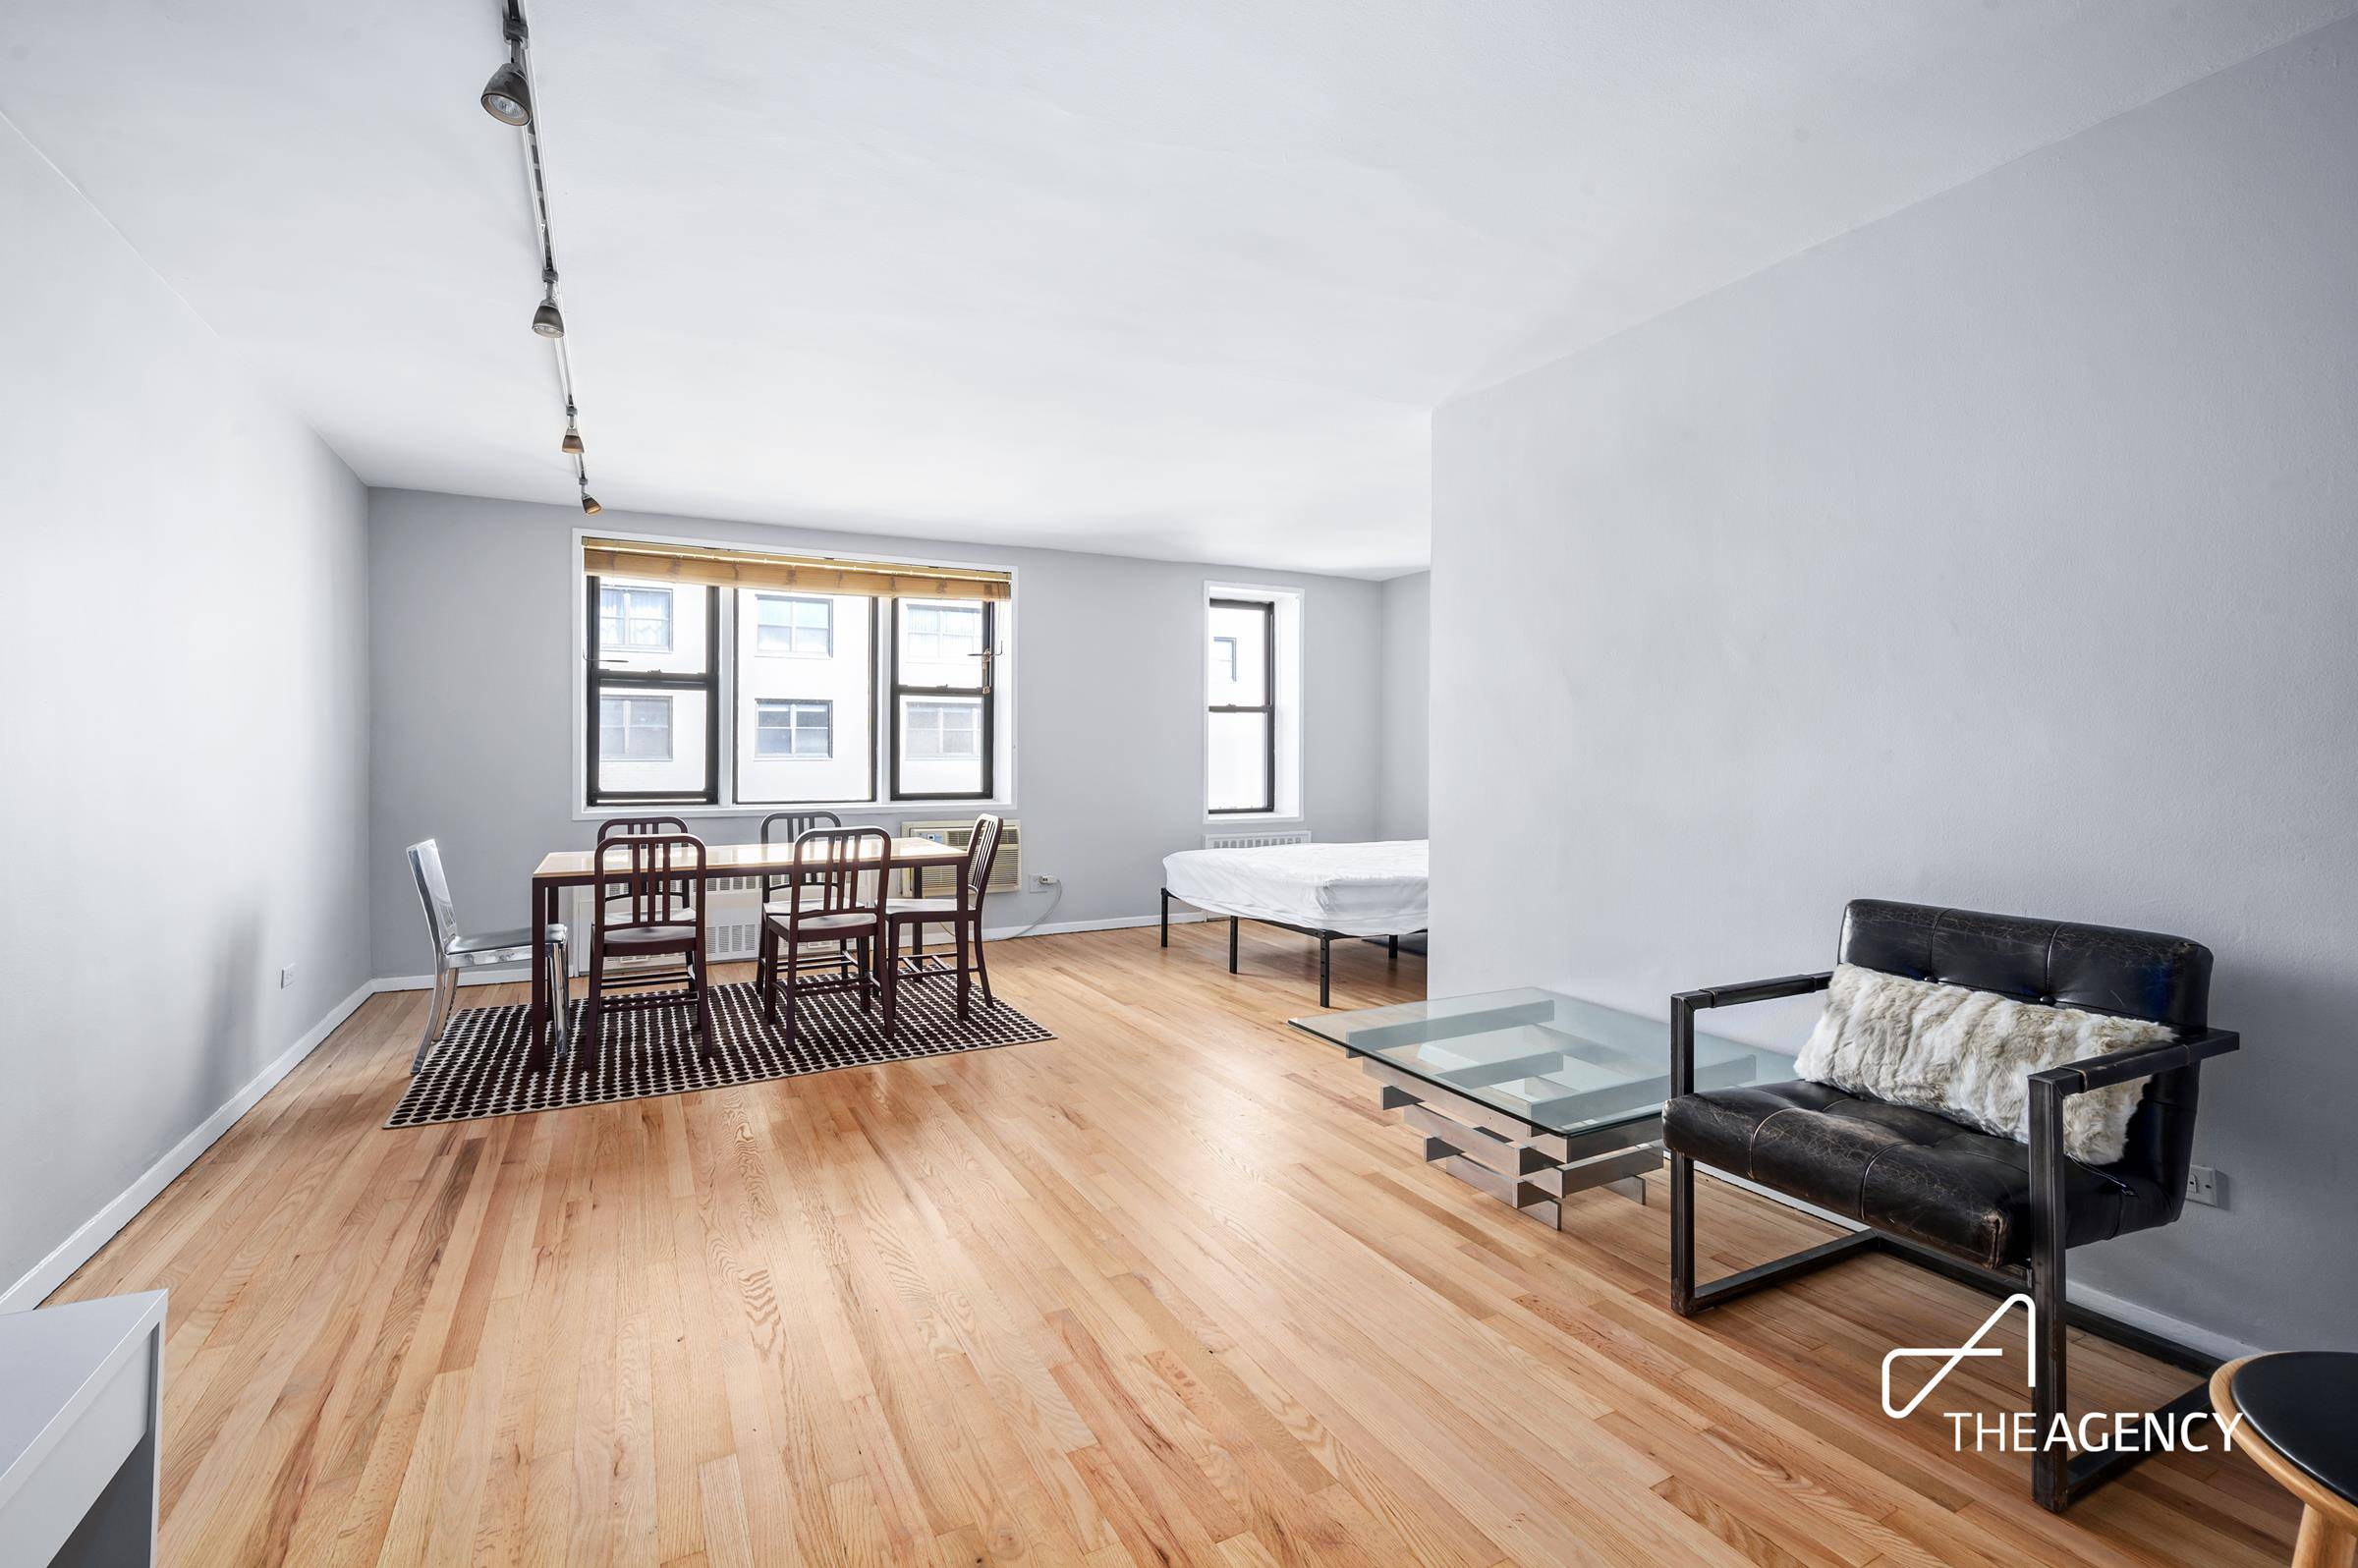 Sunflooded, spacious, and renovated home awaits you in bustling Kips Bay.